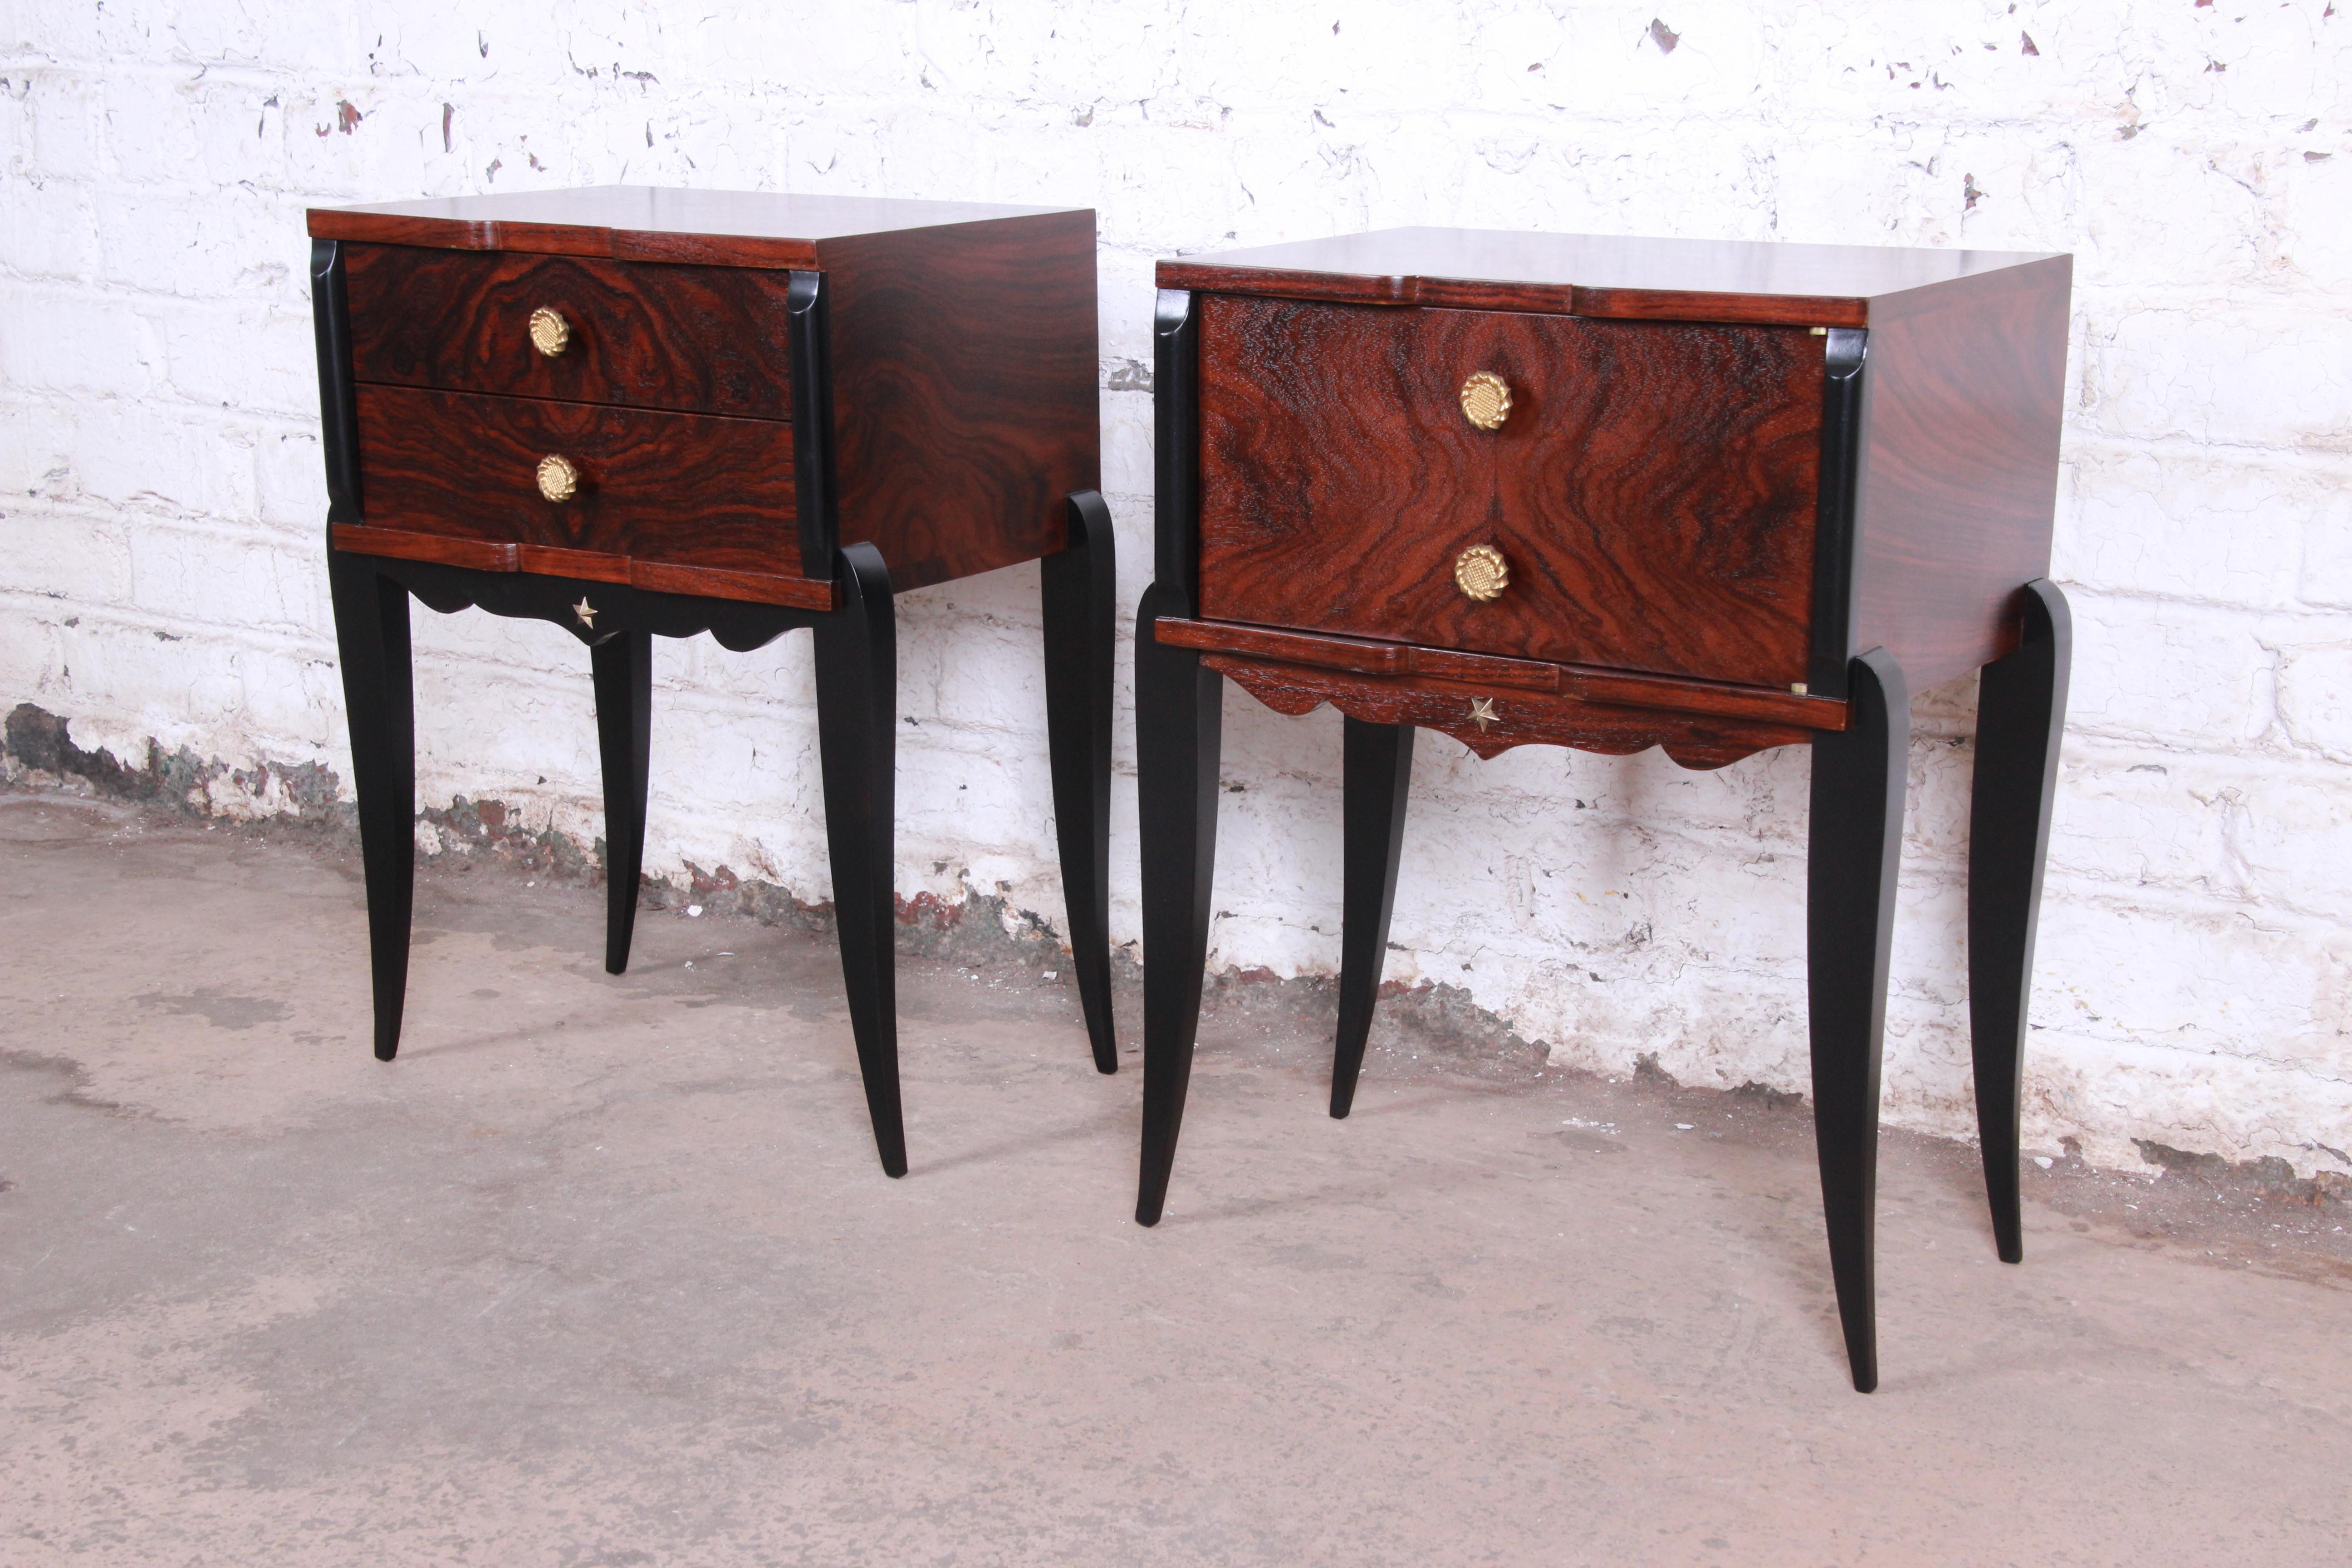 An exceptional pair of French Art Deco nightstands, circa 1930s. The nightstands feature gorgeous rosewood grain, with ebonized trim and tall, elegantly curved ebonized legs. They offer good storage, one with two dovetailed drawers and the other